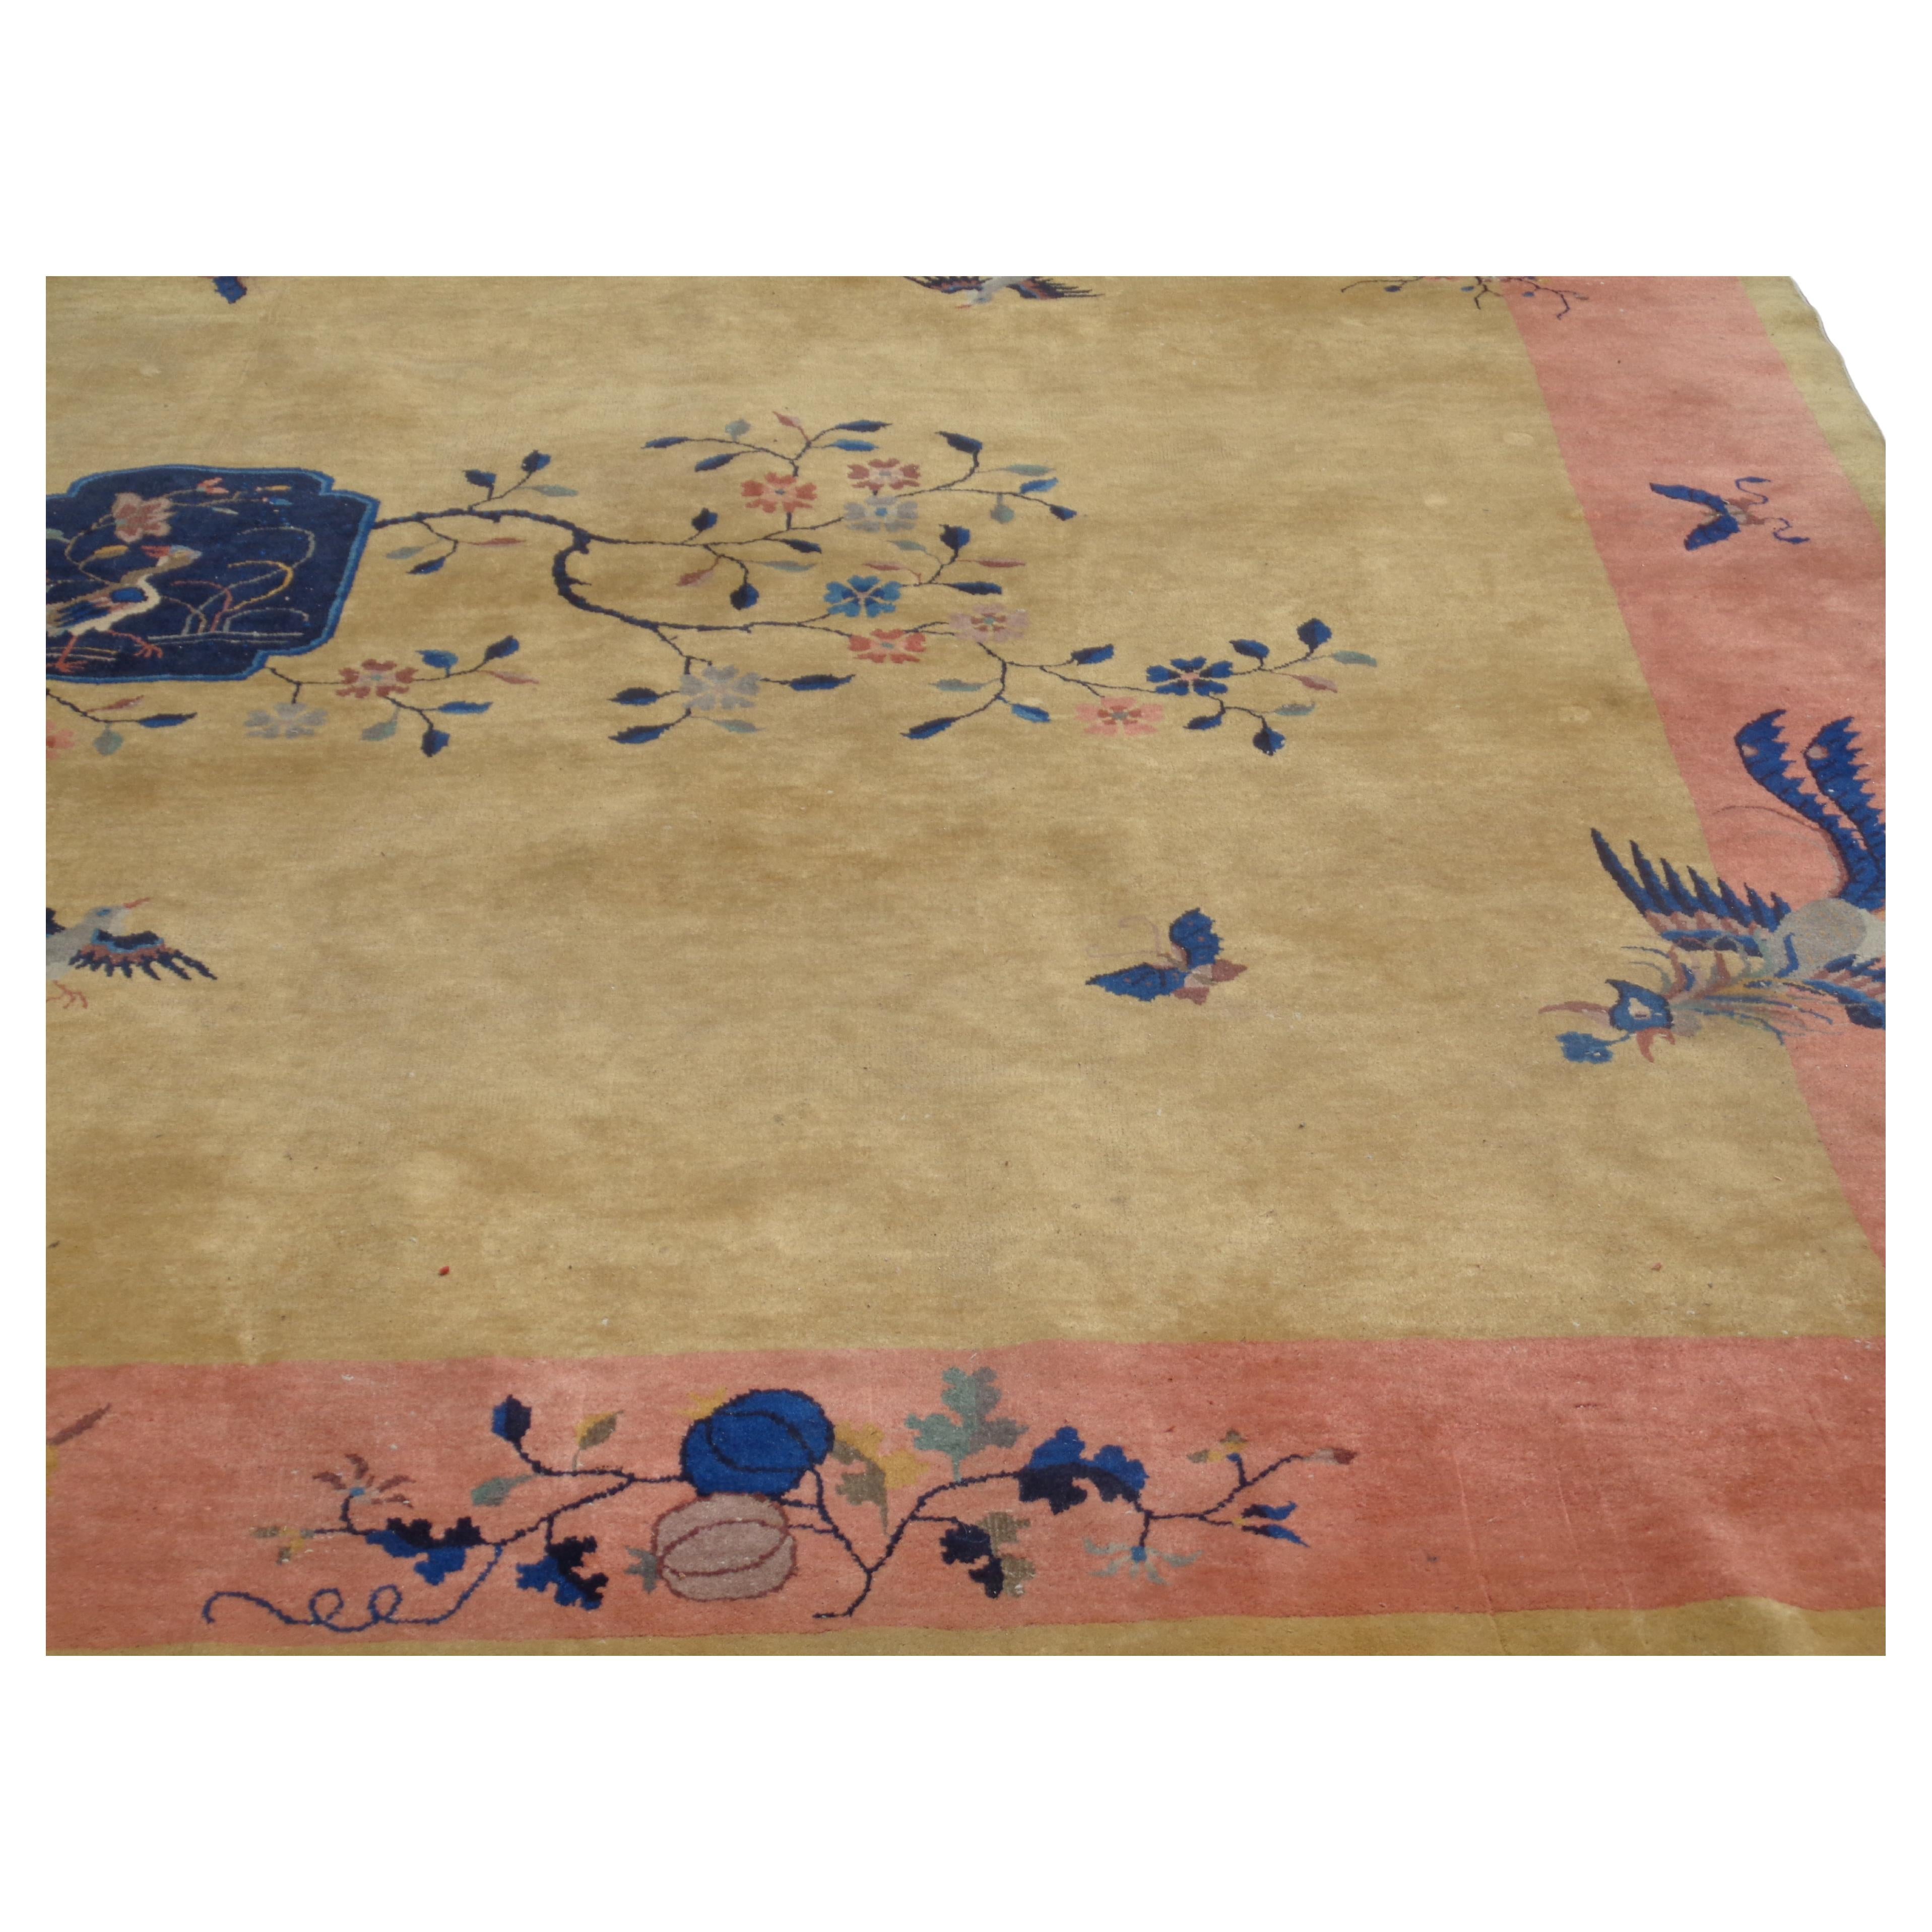 A Nichols Chinese Art Deco Oriental rug. Beautiful warm rich colors - gold, cobalt blue, light plum, peach, more. Finely drawn details - exotic birds, butterflies, floral vines, vases urns. Exceptionally pretty. Great size - 116